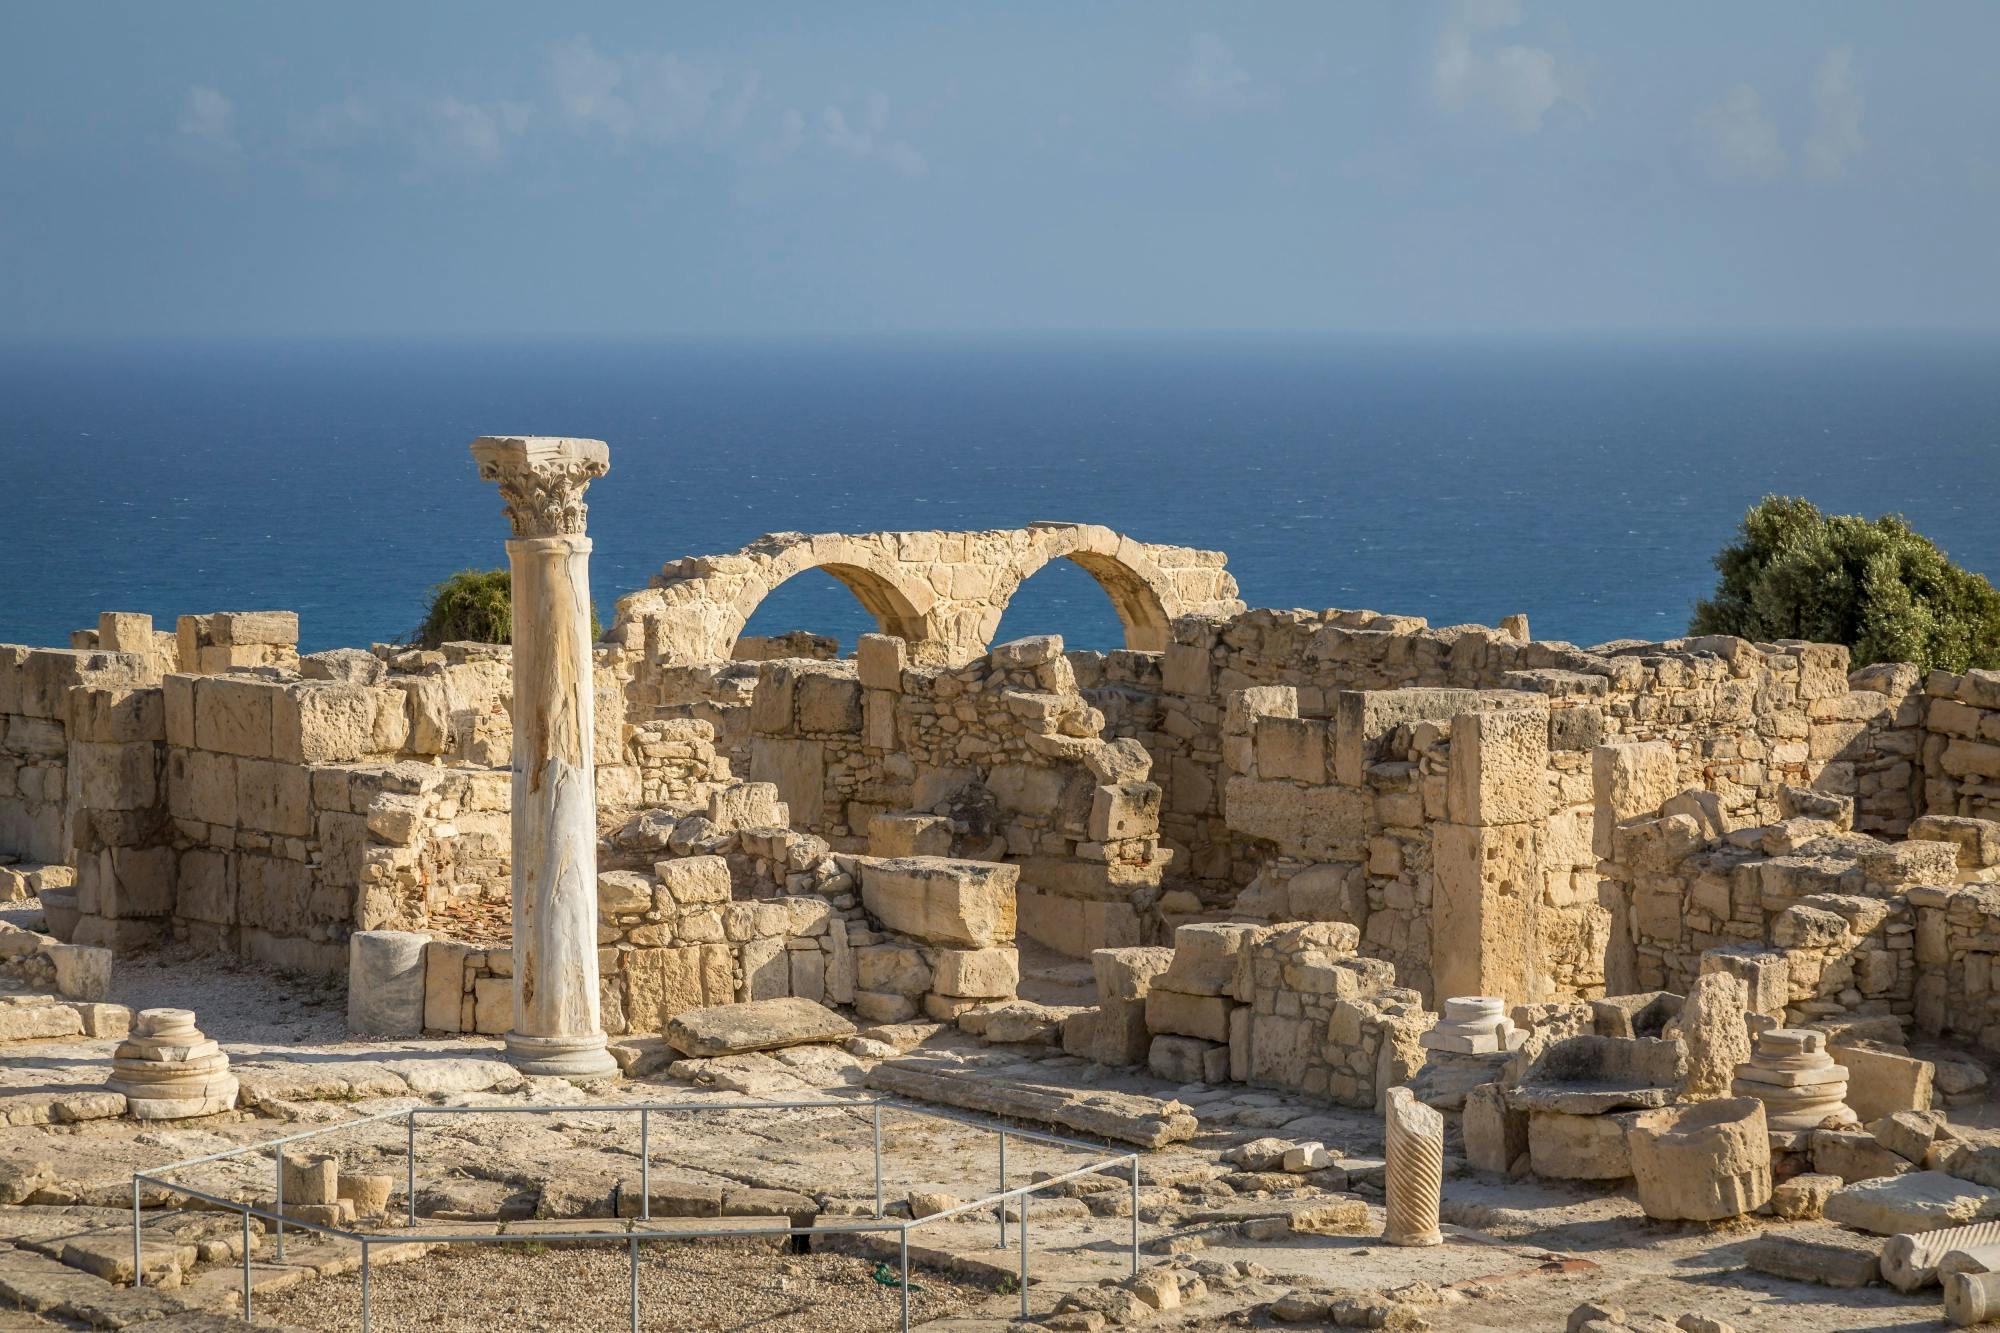 Ancient Kourion, Kolossi Castle, Omodos & Winery Tour from Limassol